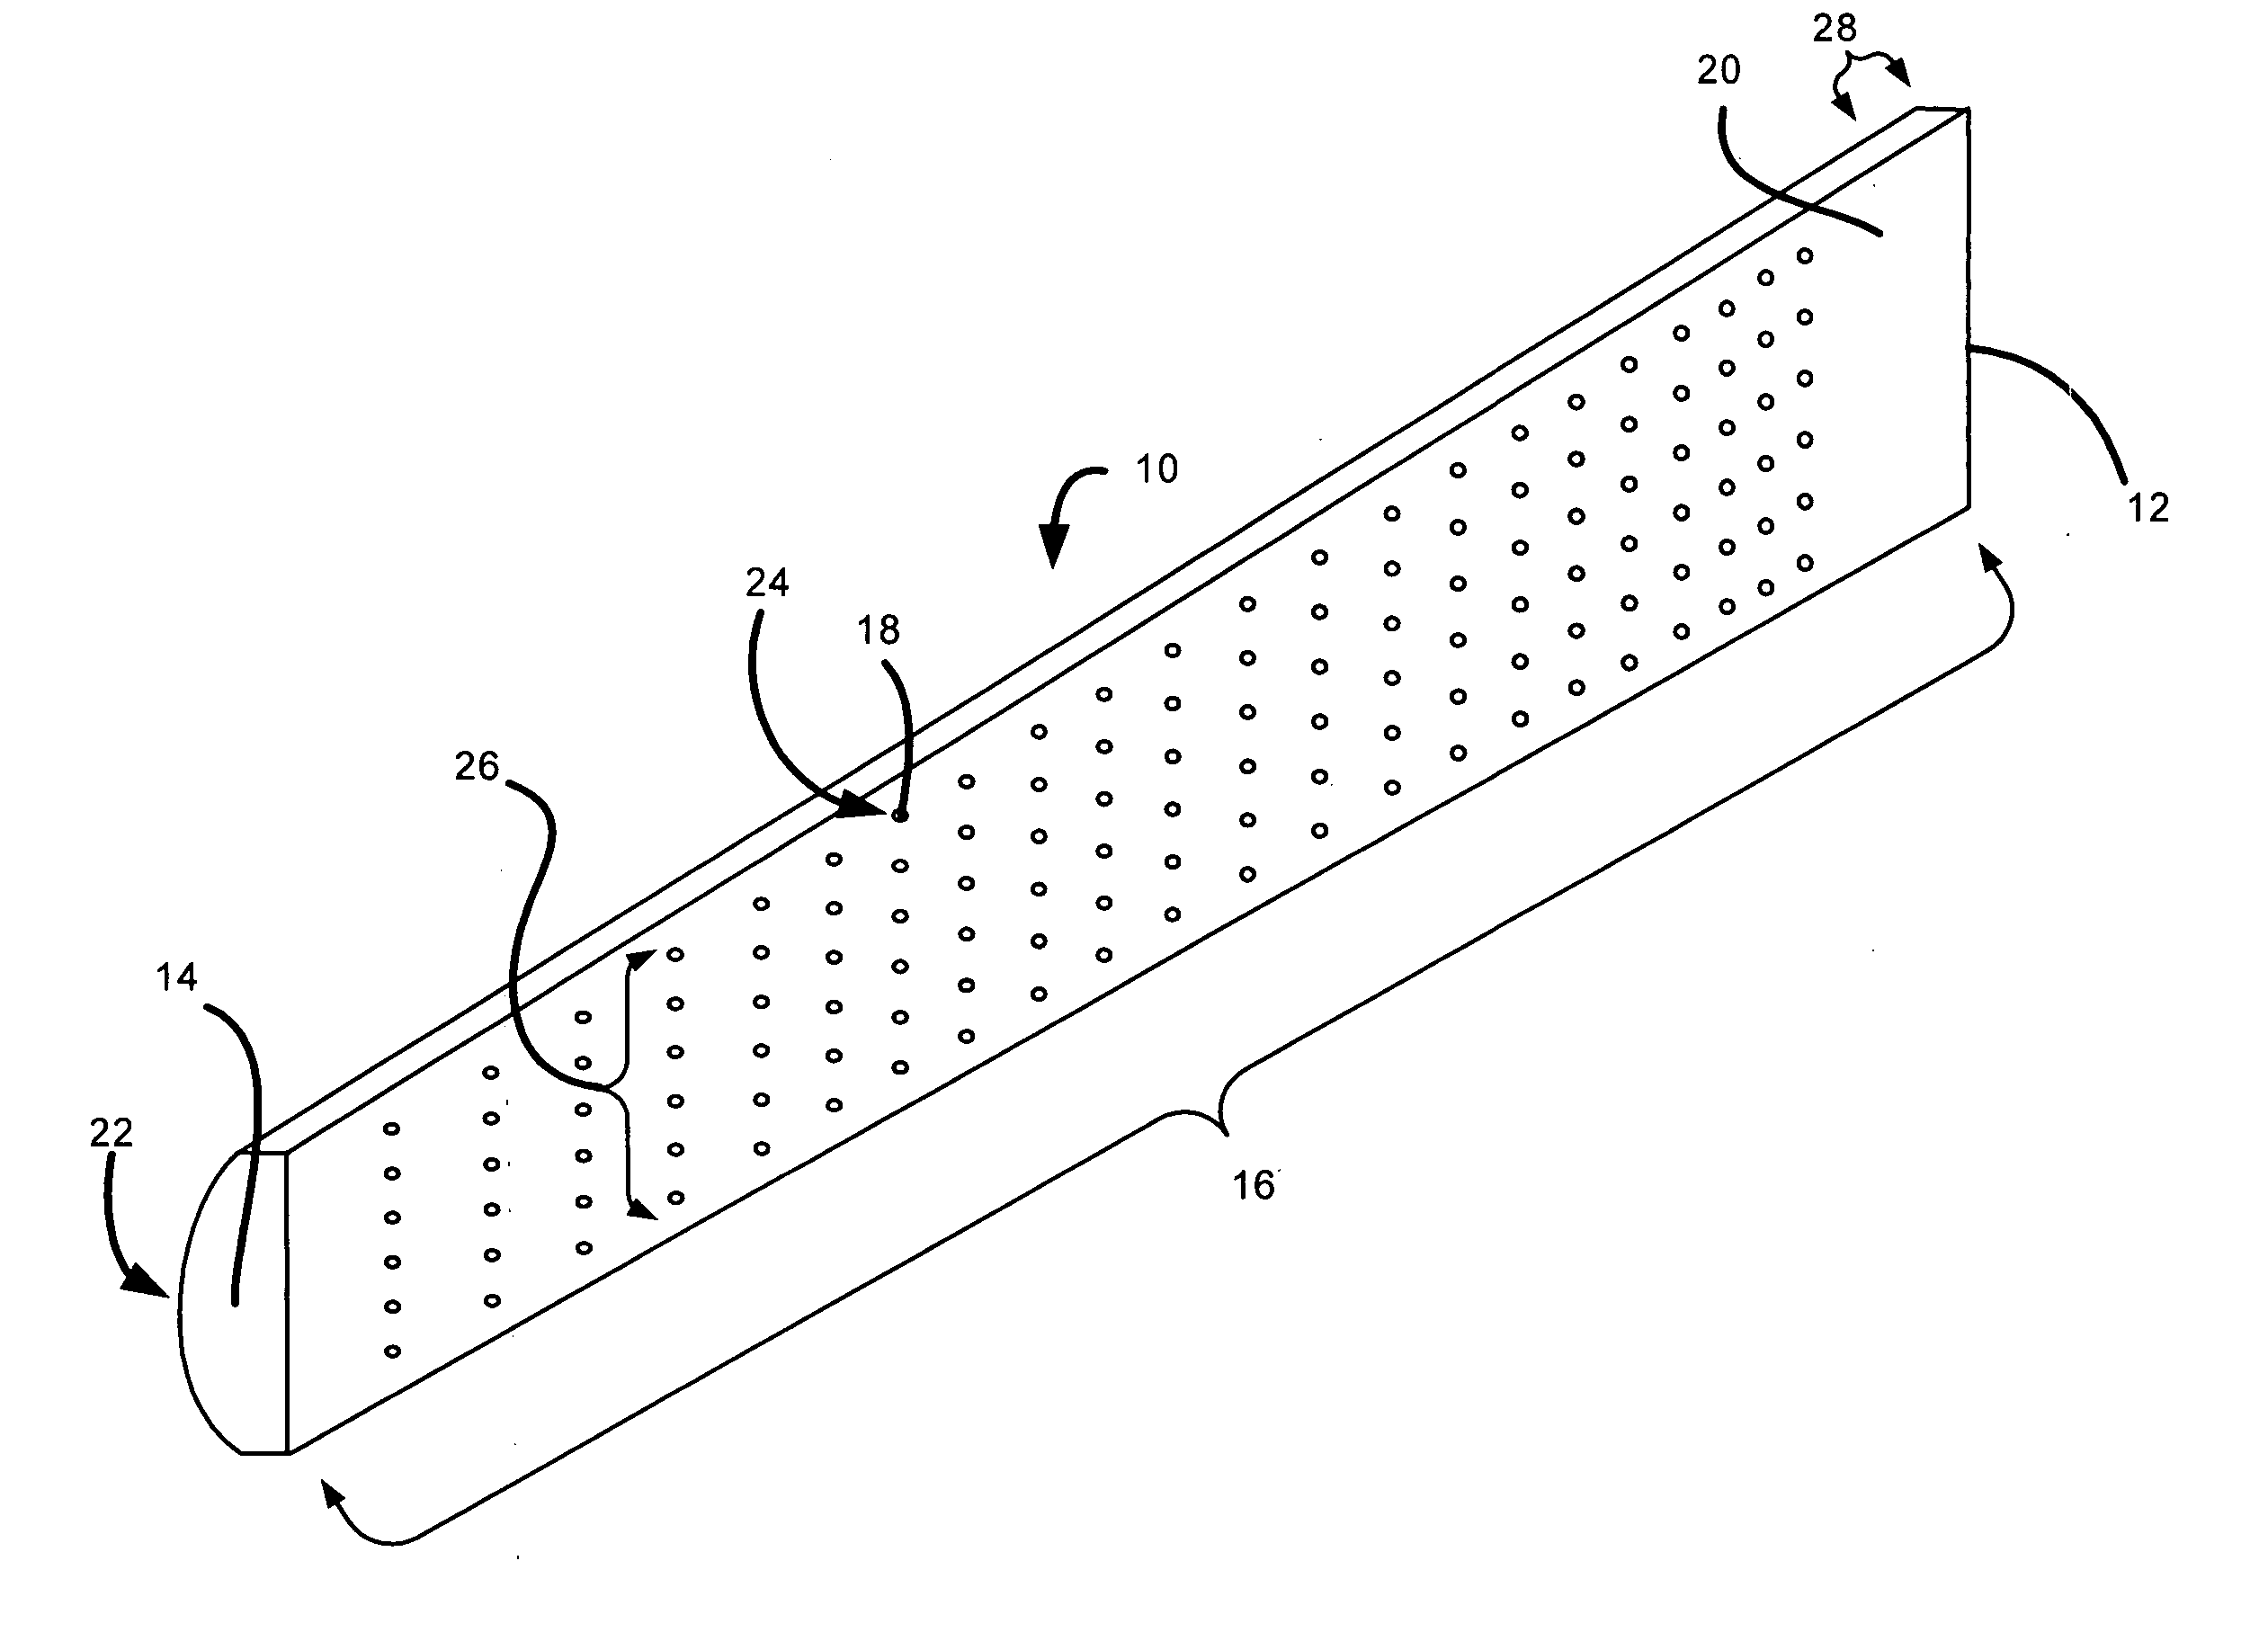 Stringed instrument fingerboard for use with a light-system